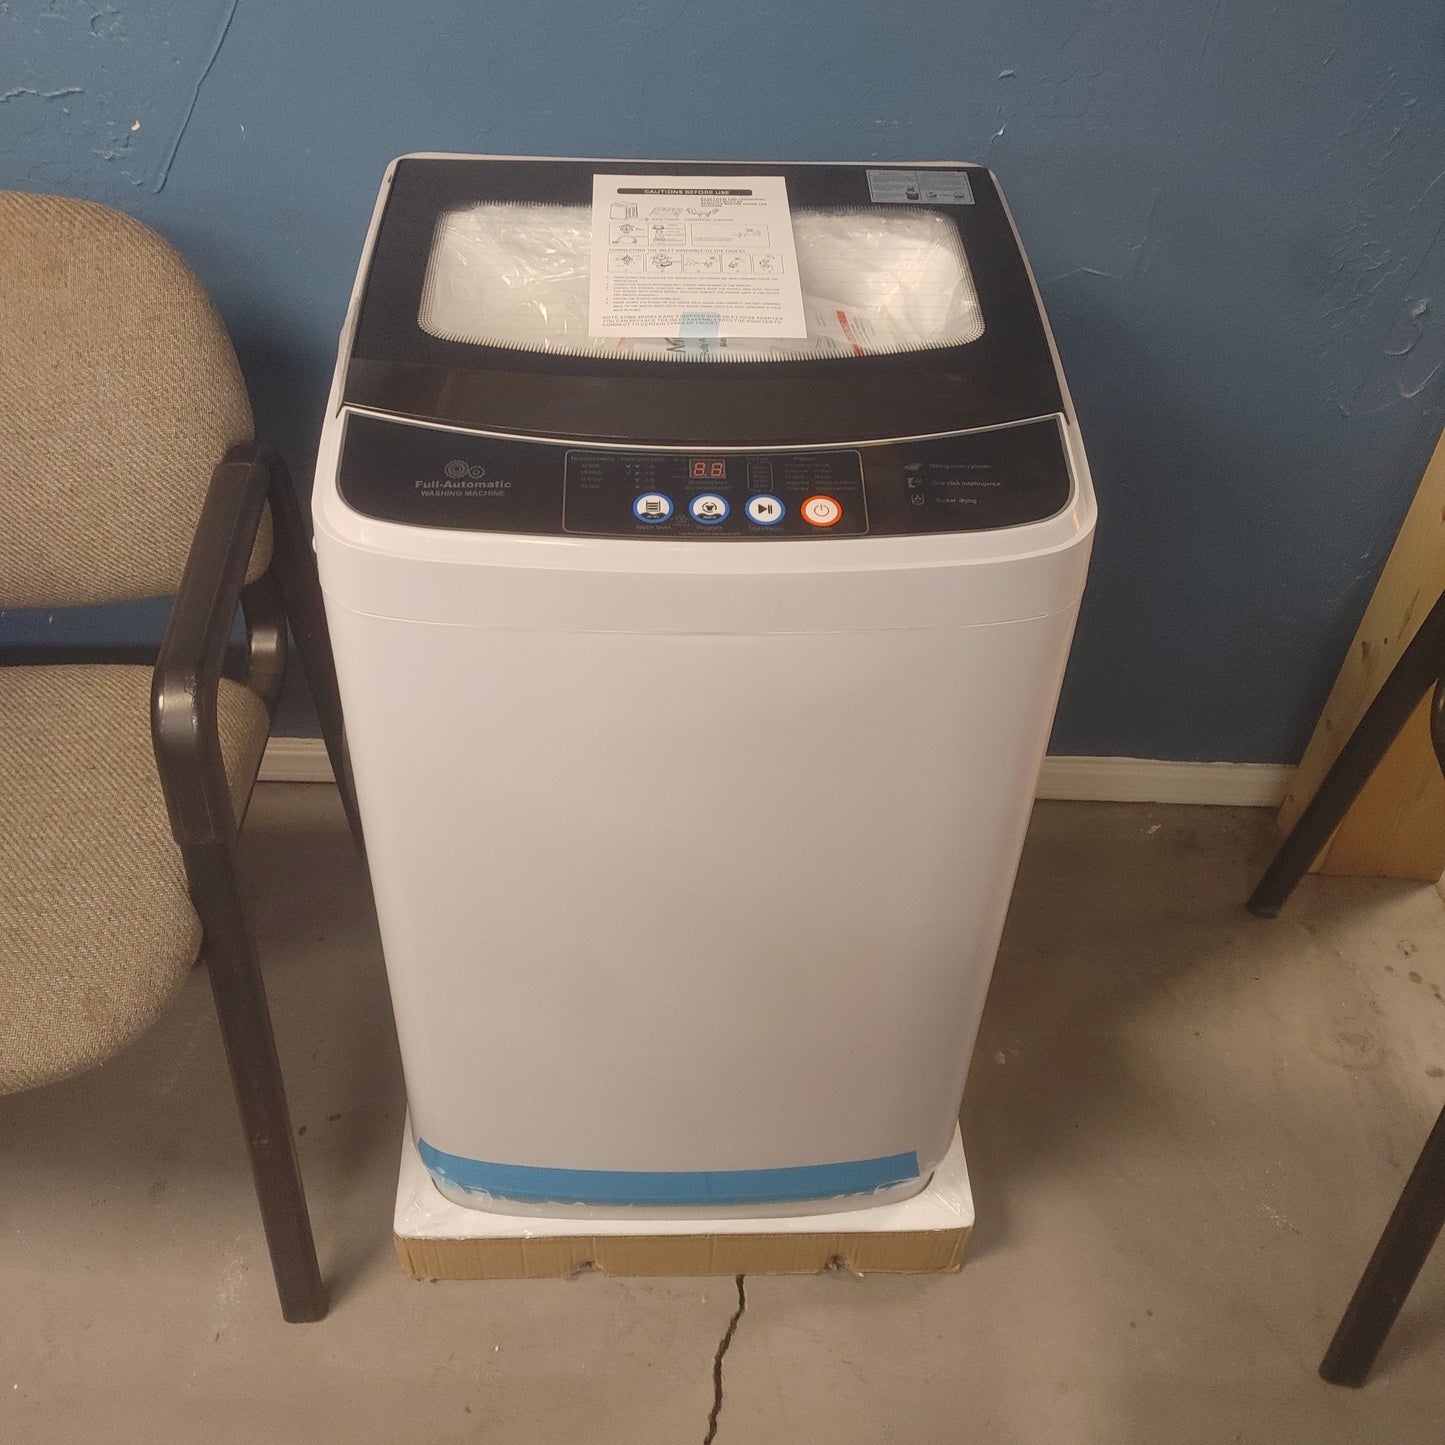 New Haier 2.4 Cubic Ft Top Load Washer. Apt size. Fully automatic